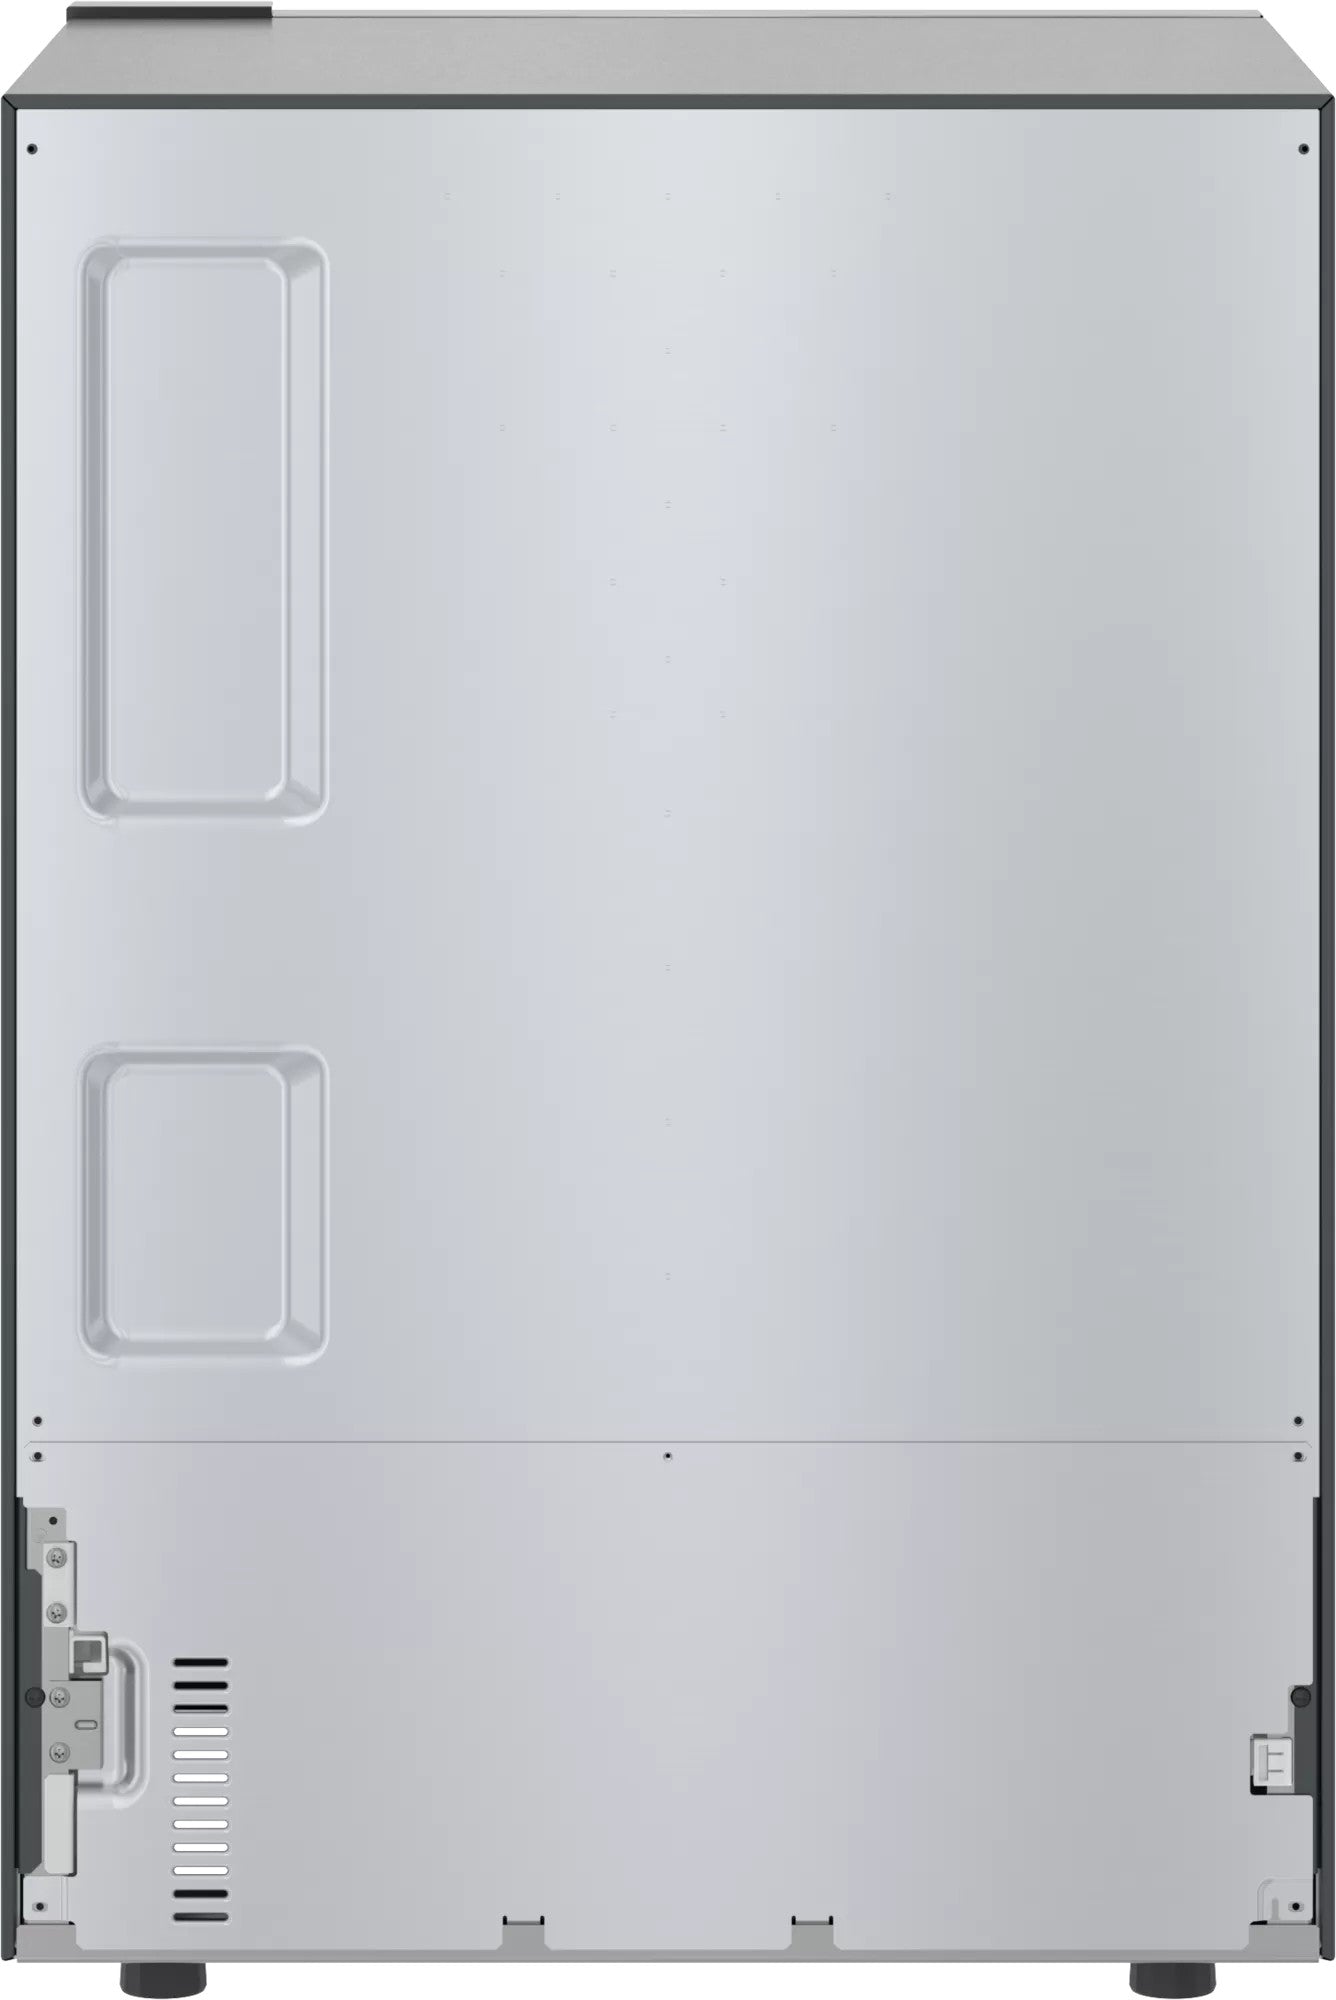 Thermador - 23.9 Inch 23.9 cu. ft Built In / Integrated Refrigerator in Stainless (Open Box) - T24UW915RS